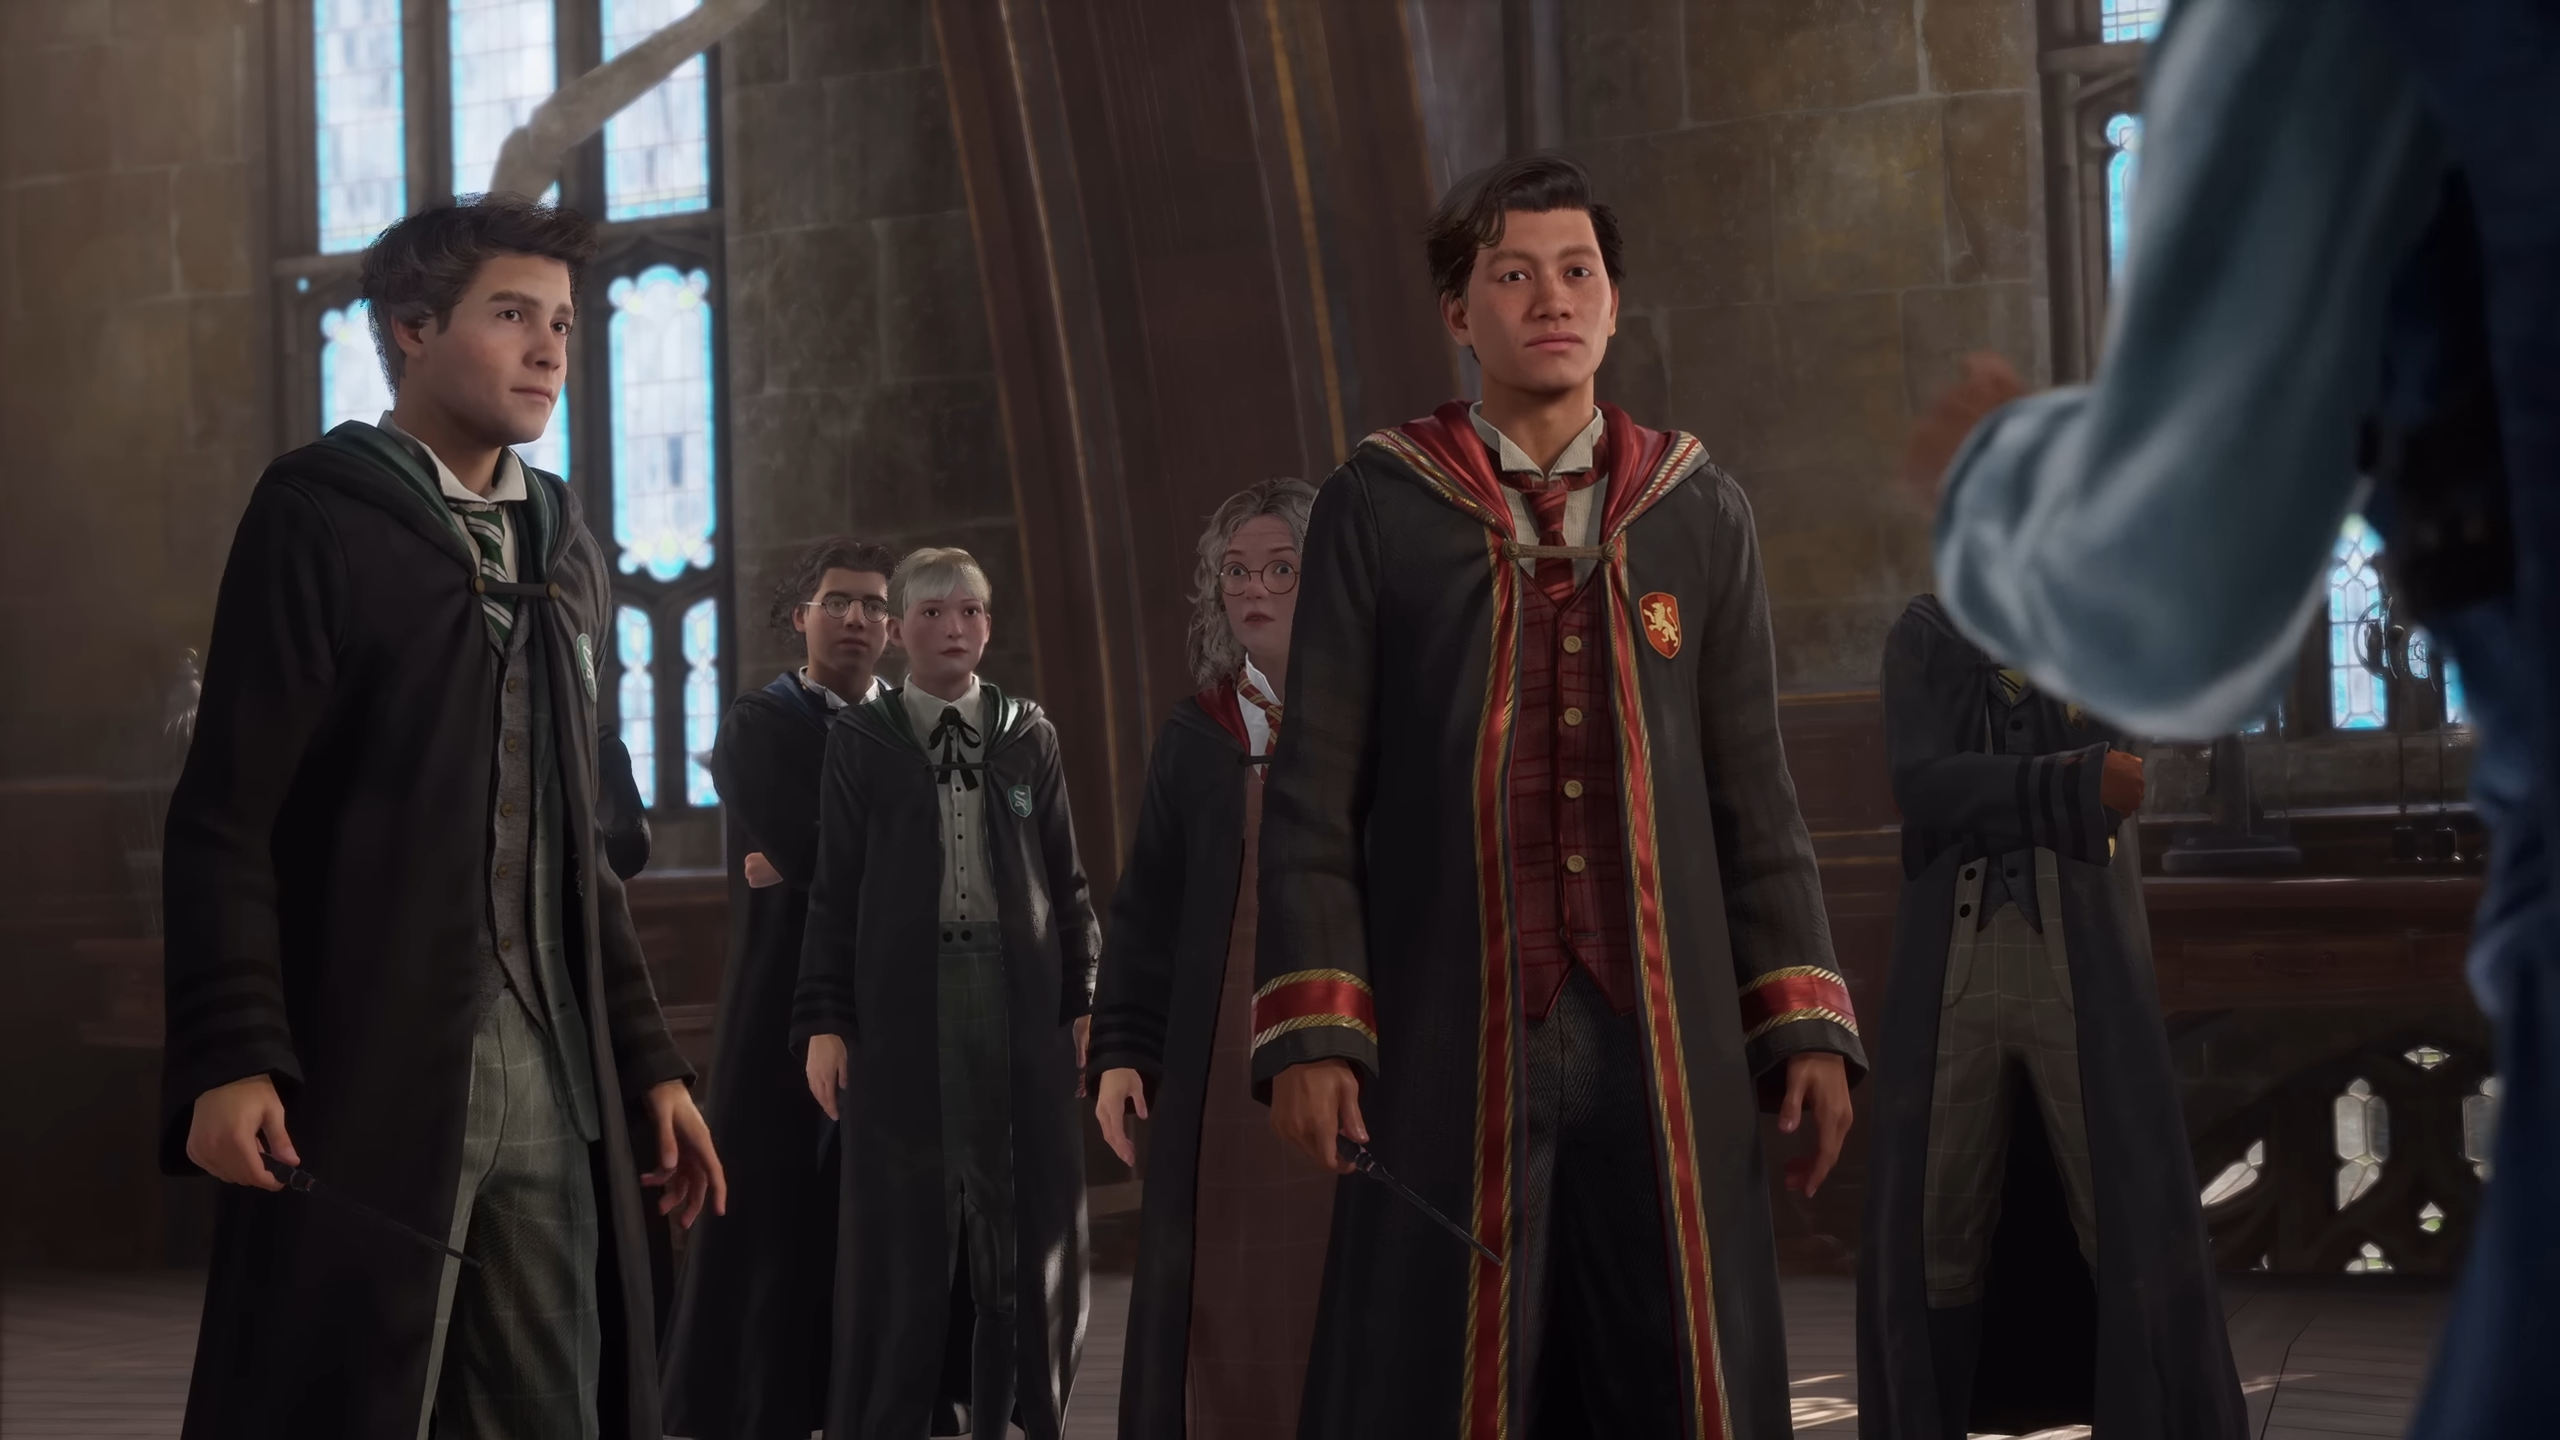 Rowena Ravenclaw Fan Casting for The Founders of Hogwarts: A Harry